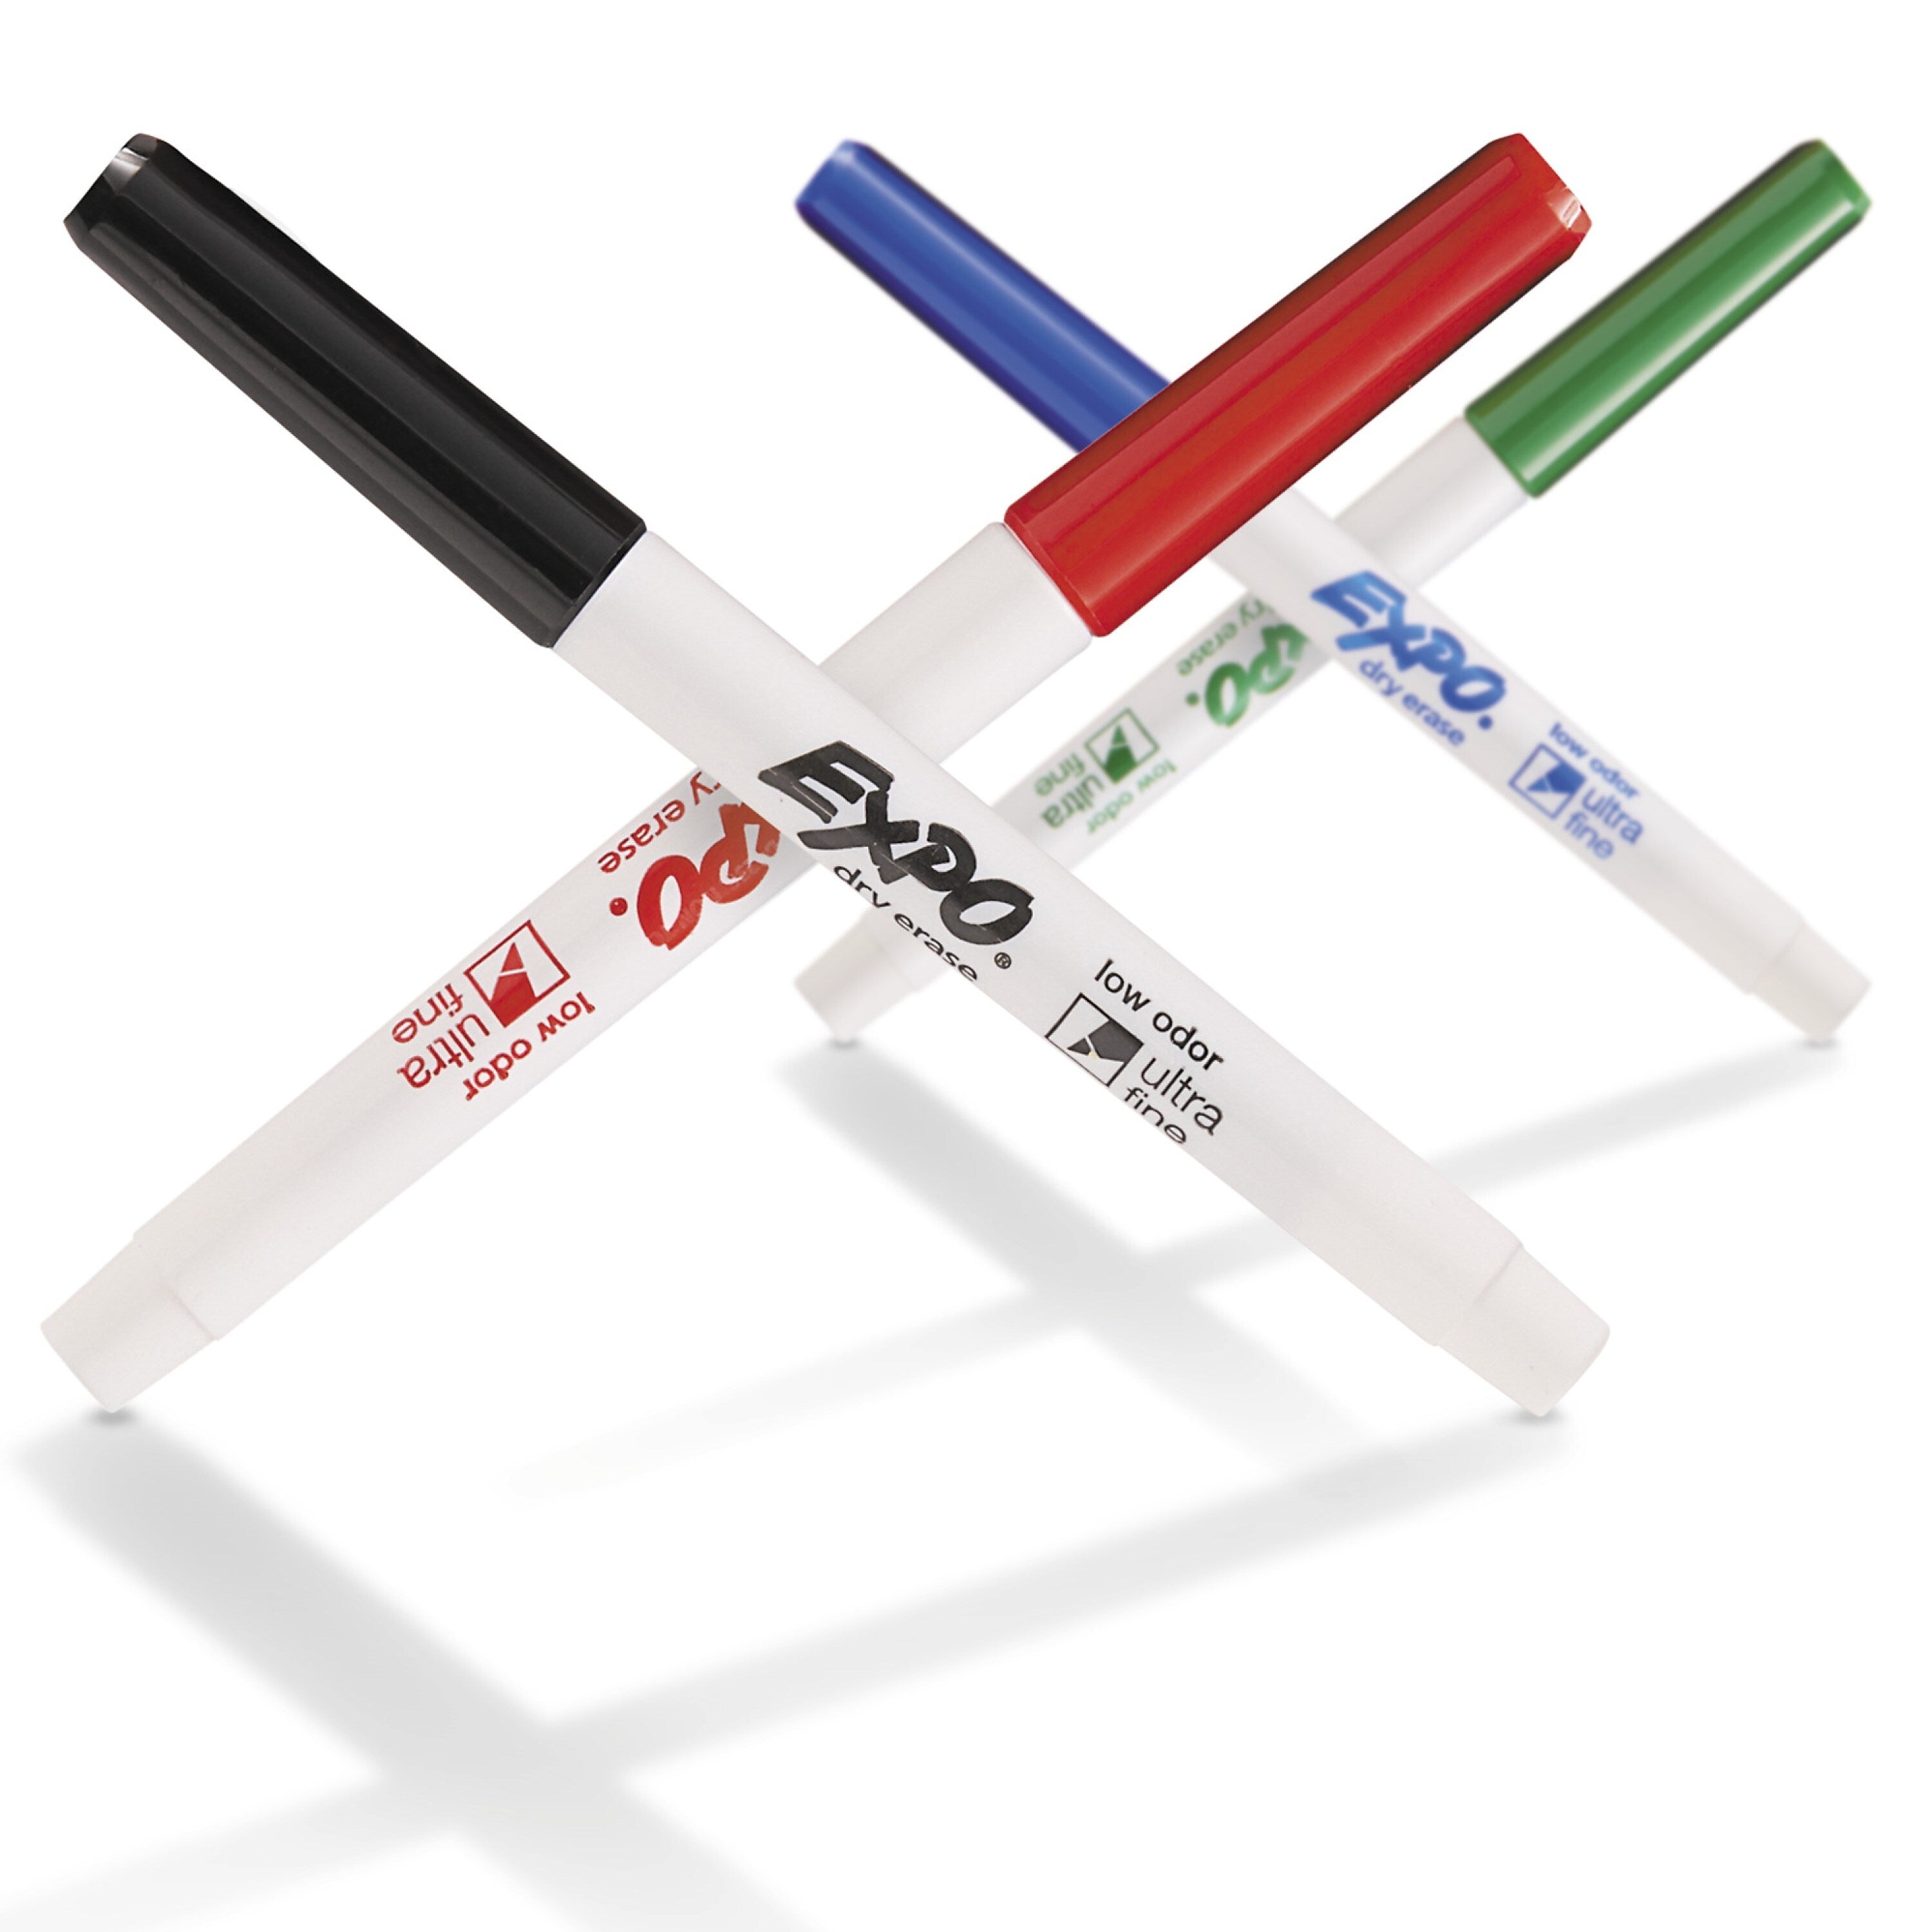 Expo Dry Erase Markers, Ultra Fine Tip, Assorted, 4/Pack